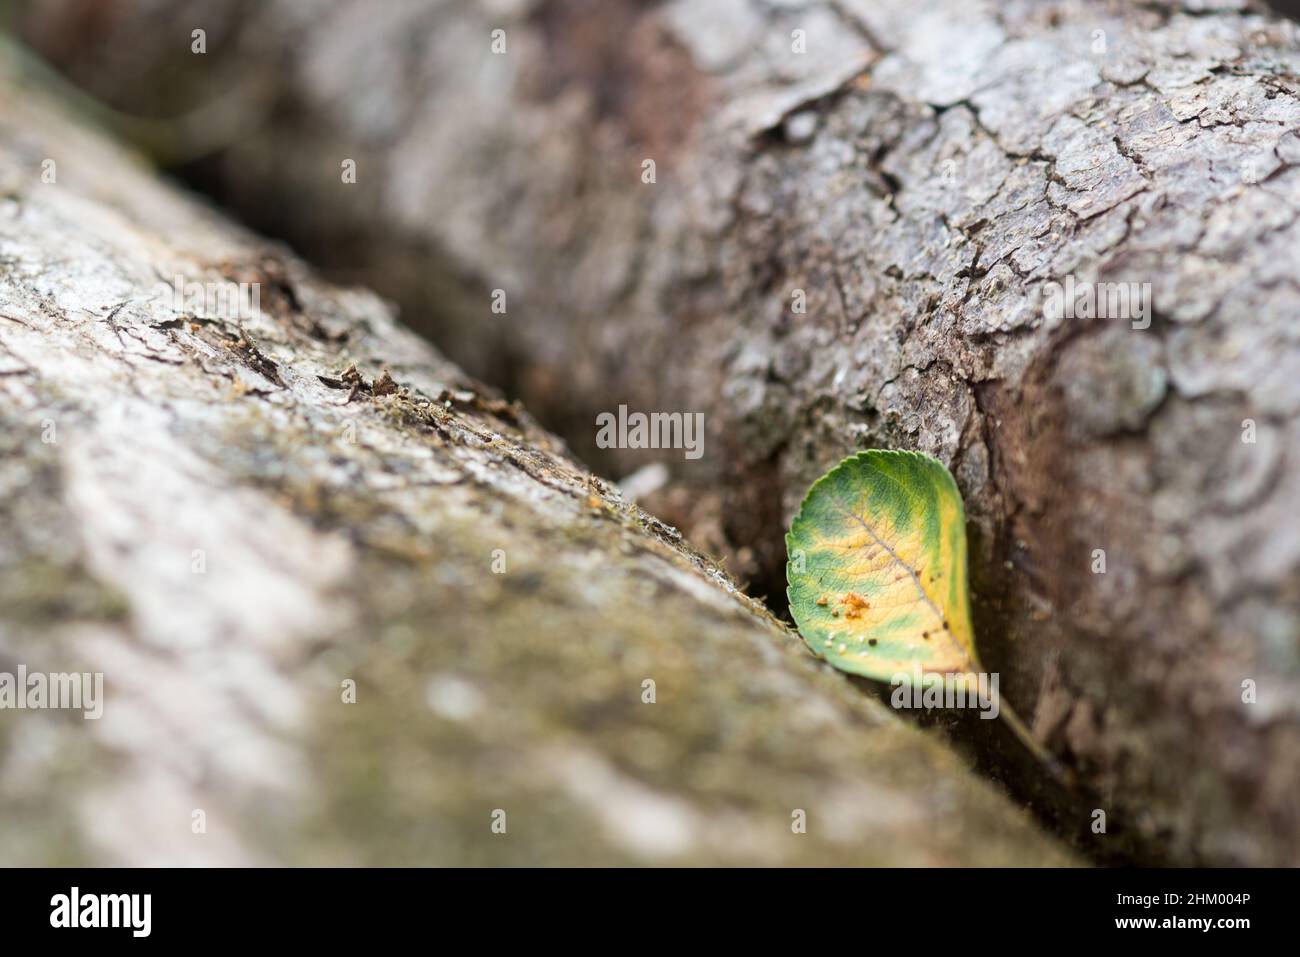 A lonely green leaf between two logs. Stock Photo